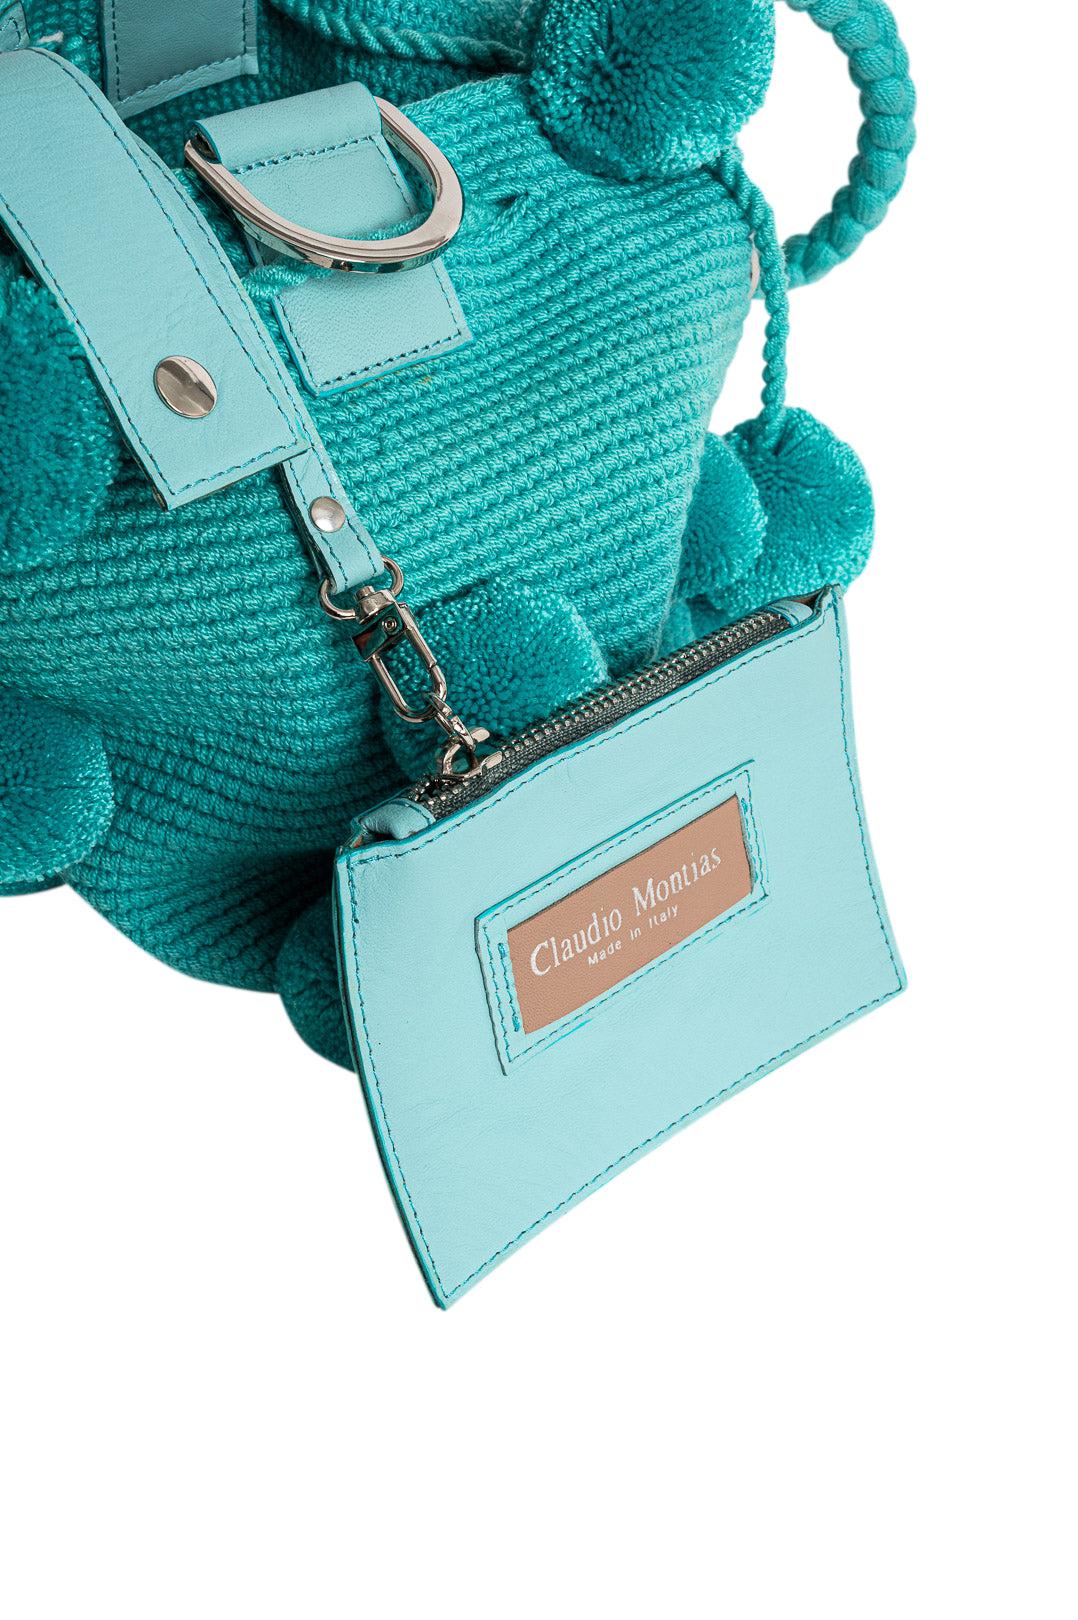 Claudio Montias-Small Woven Basket Bag-Small woaven basket bag turquoise-dgallerystore